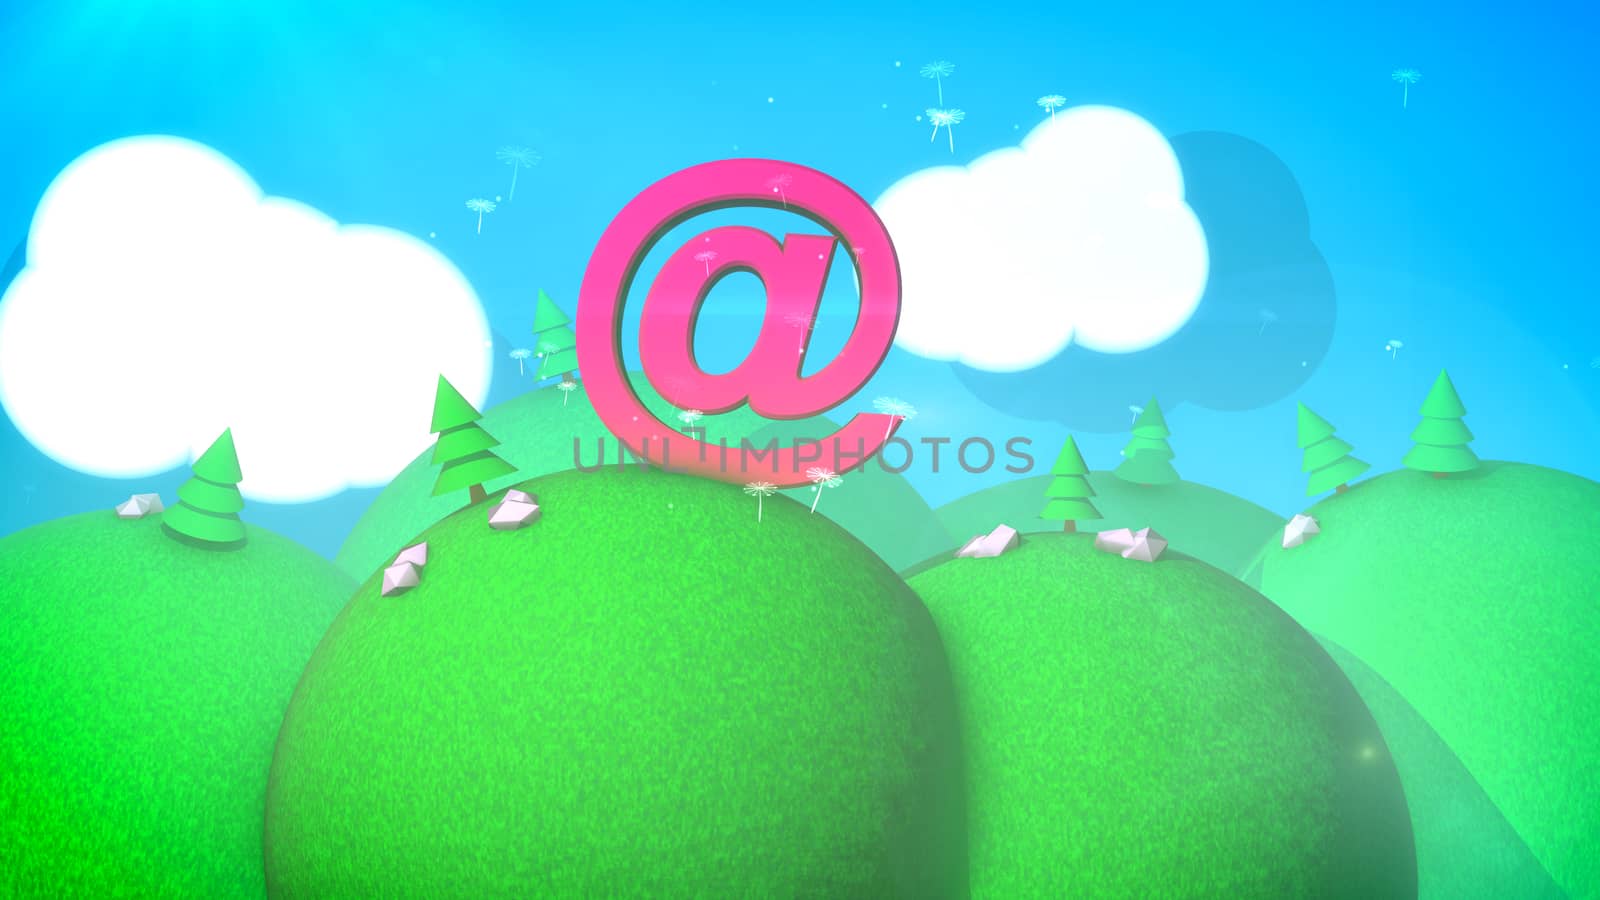 A childish 3d illustration of a sunny landscape with round hills, pine trees, green lawns, flying dandelion parachutes, shadows and blue sky with white clouds, large pink at sign.